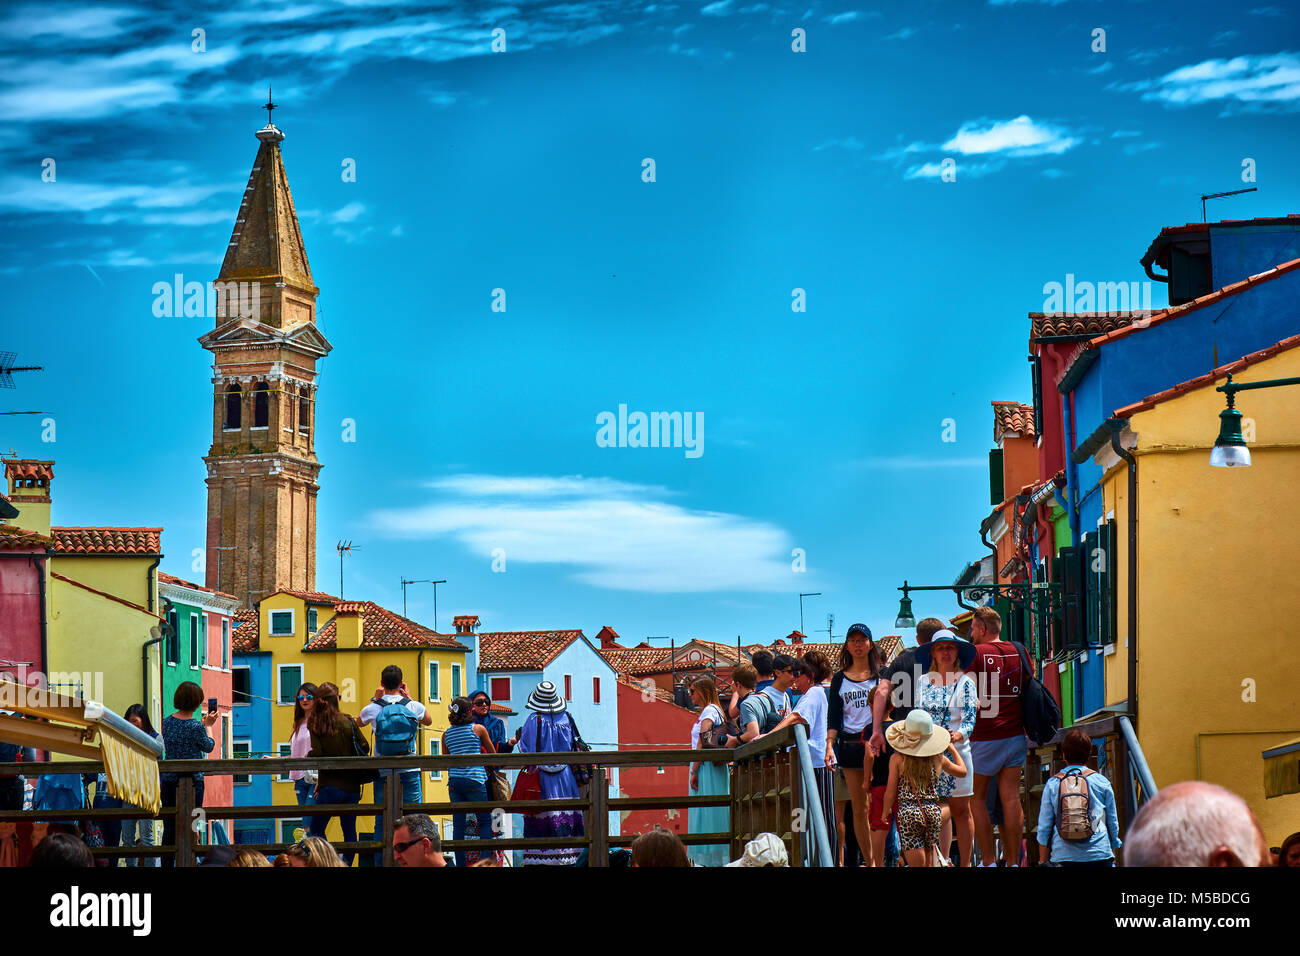 BURANO, ITALY - MAY 21, 2017: Tourists walking on a bridge in Burano with the Leaning Bell Tower in the background. Stock Photo